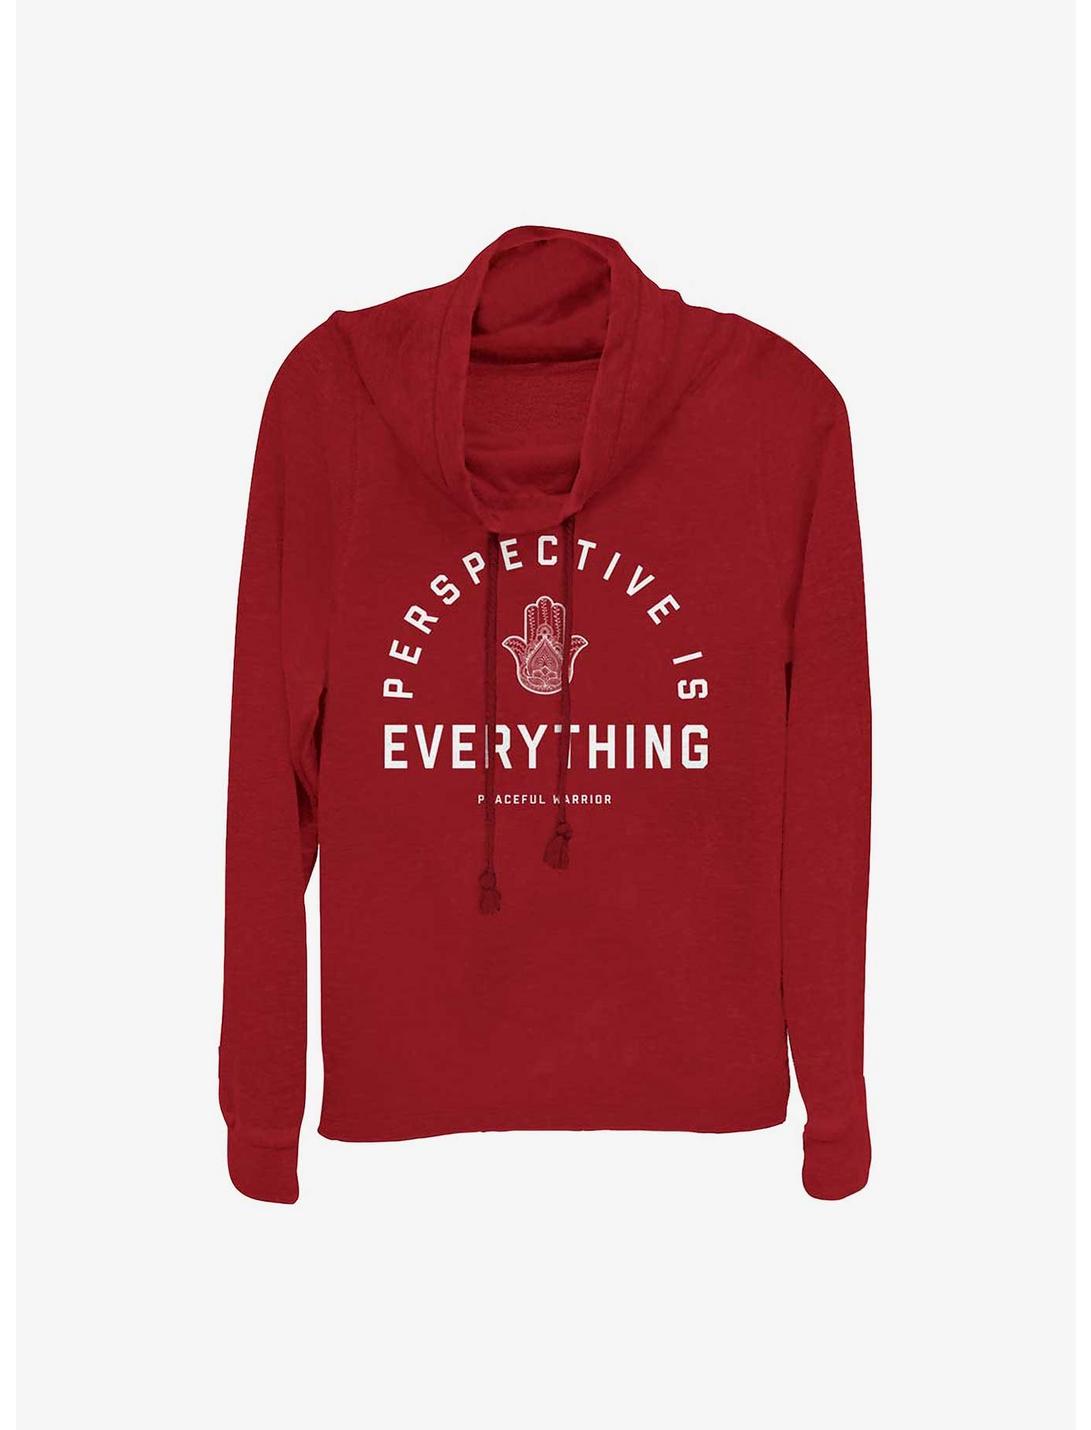 Perspective Is Everything Girls Cowl Neck Long Sleeve Top, SCARLET, hi-res